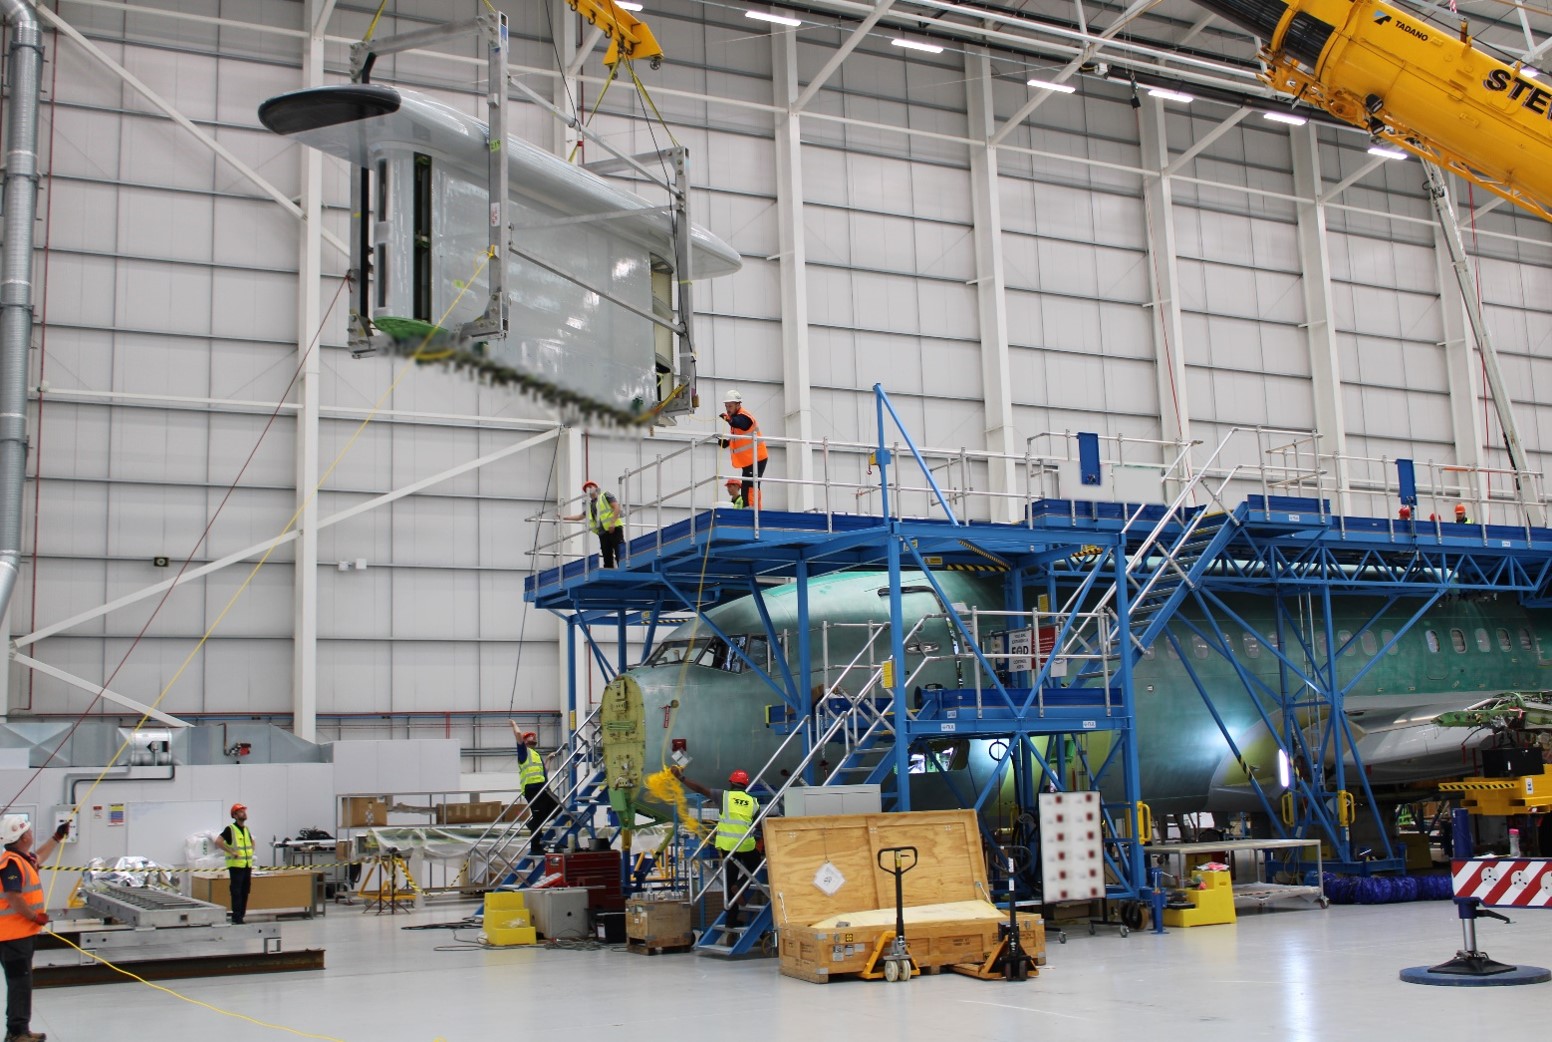 Image shows aircraft parts being assembled inside hangar. with crane lifting parts.